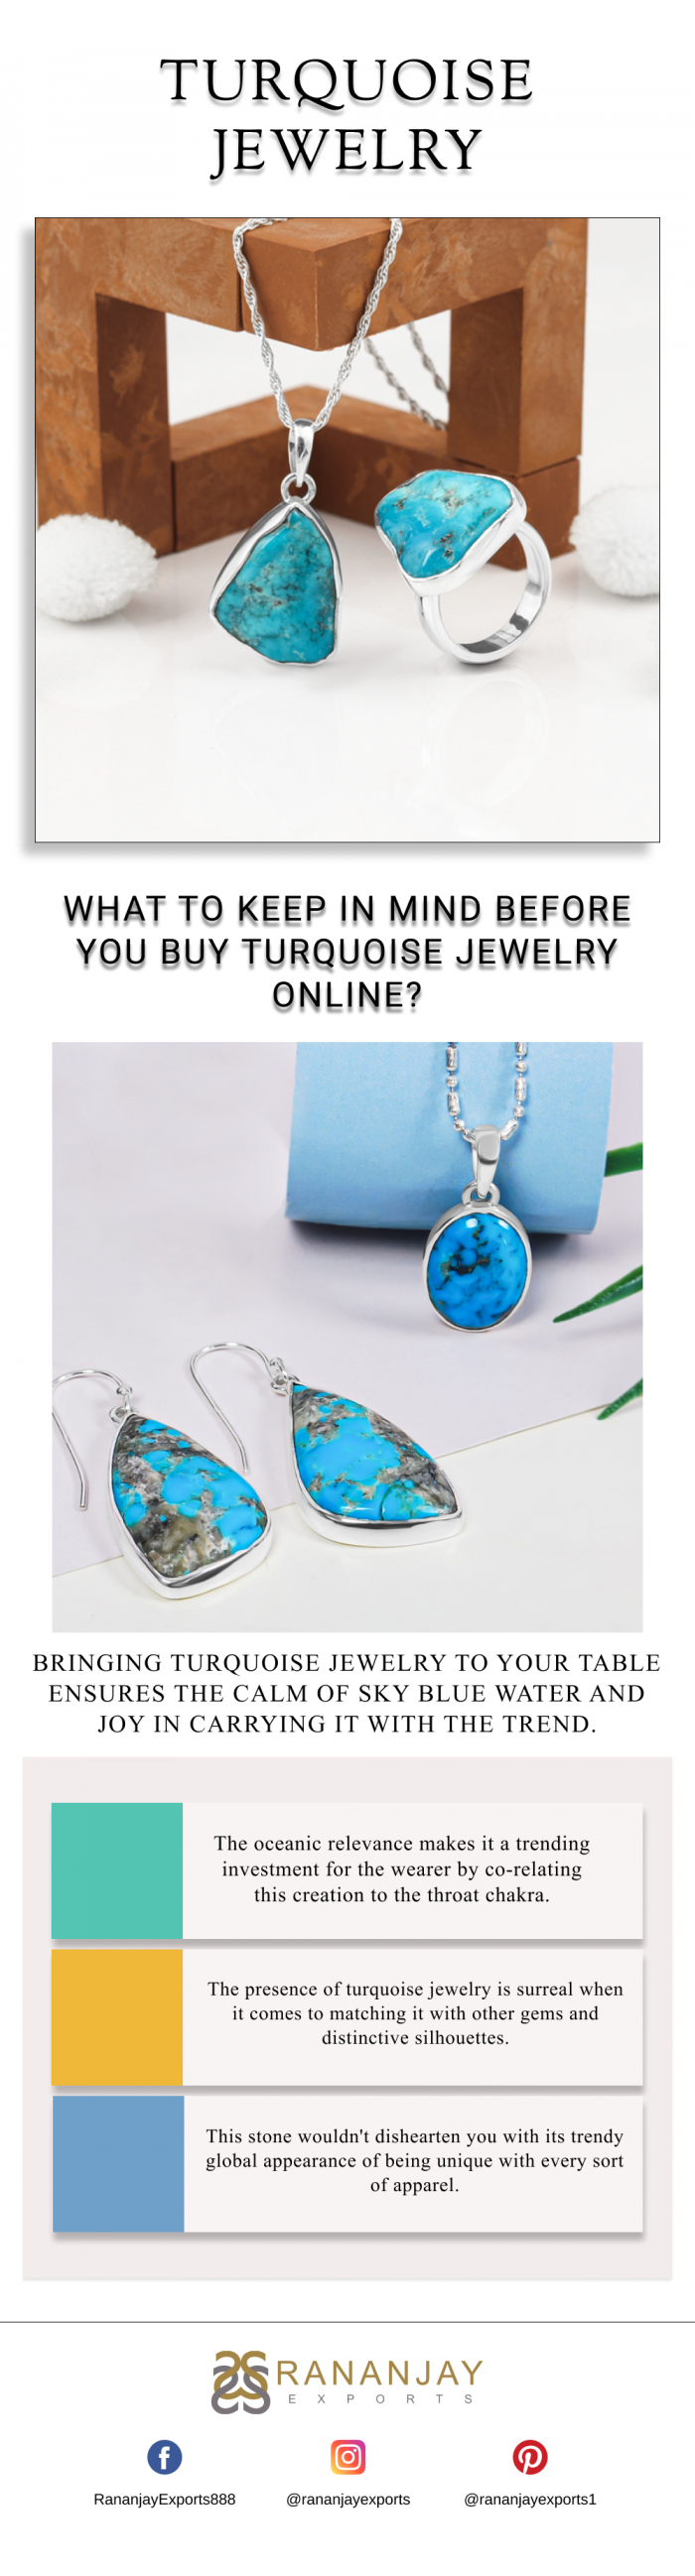 What to Keep in Mind Before You Buy turquoise Jewelry Online?